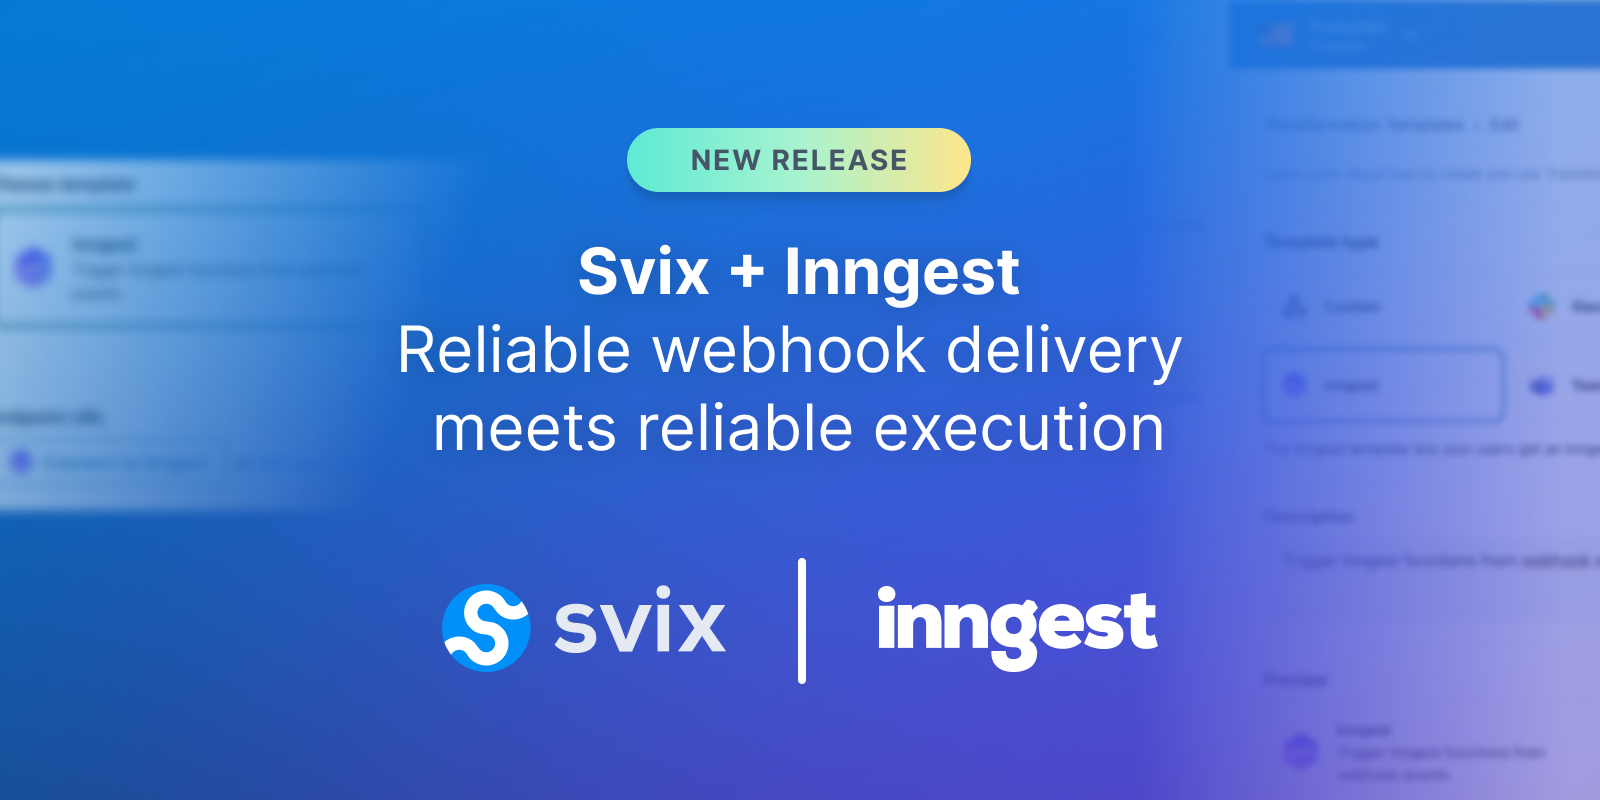 Featured image for Svix + Inngest: Reliable Webhook Delivery and Execution blog post